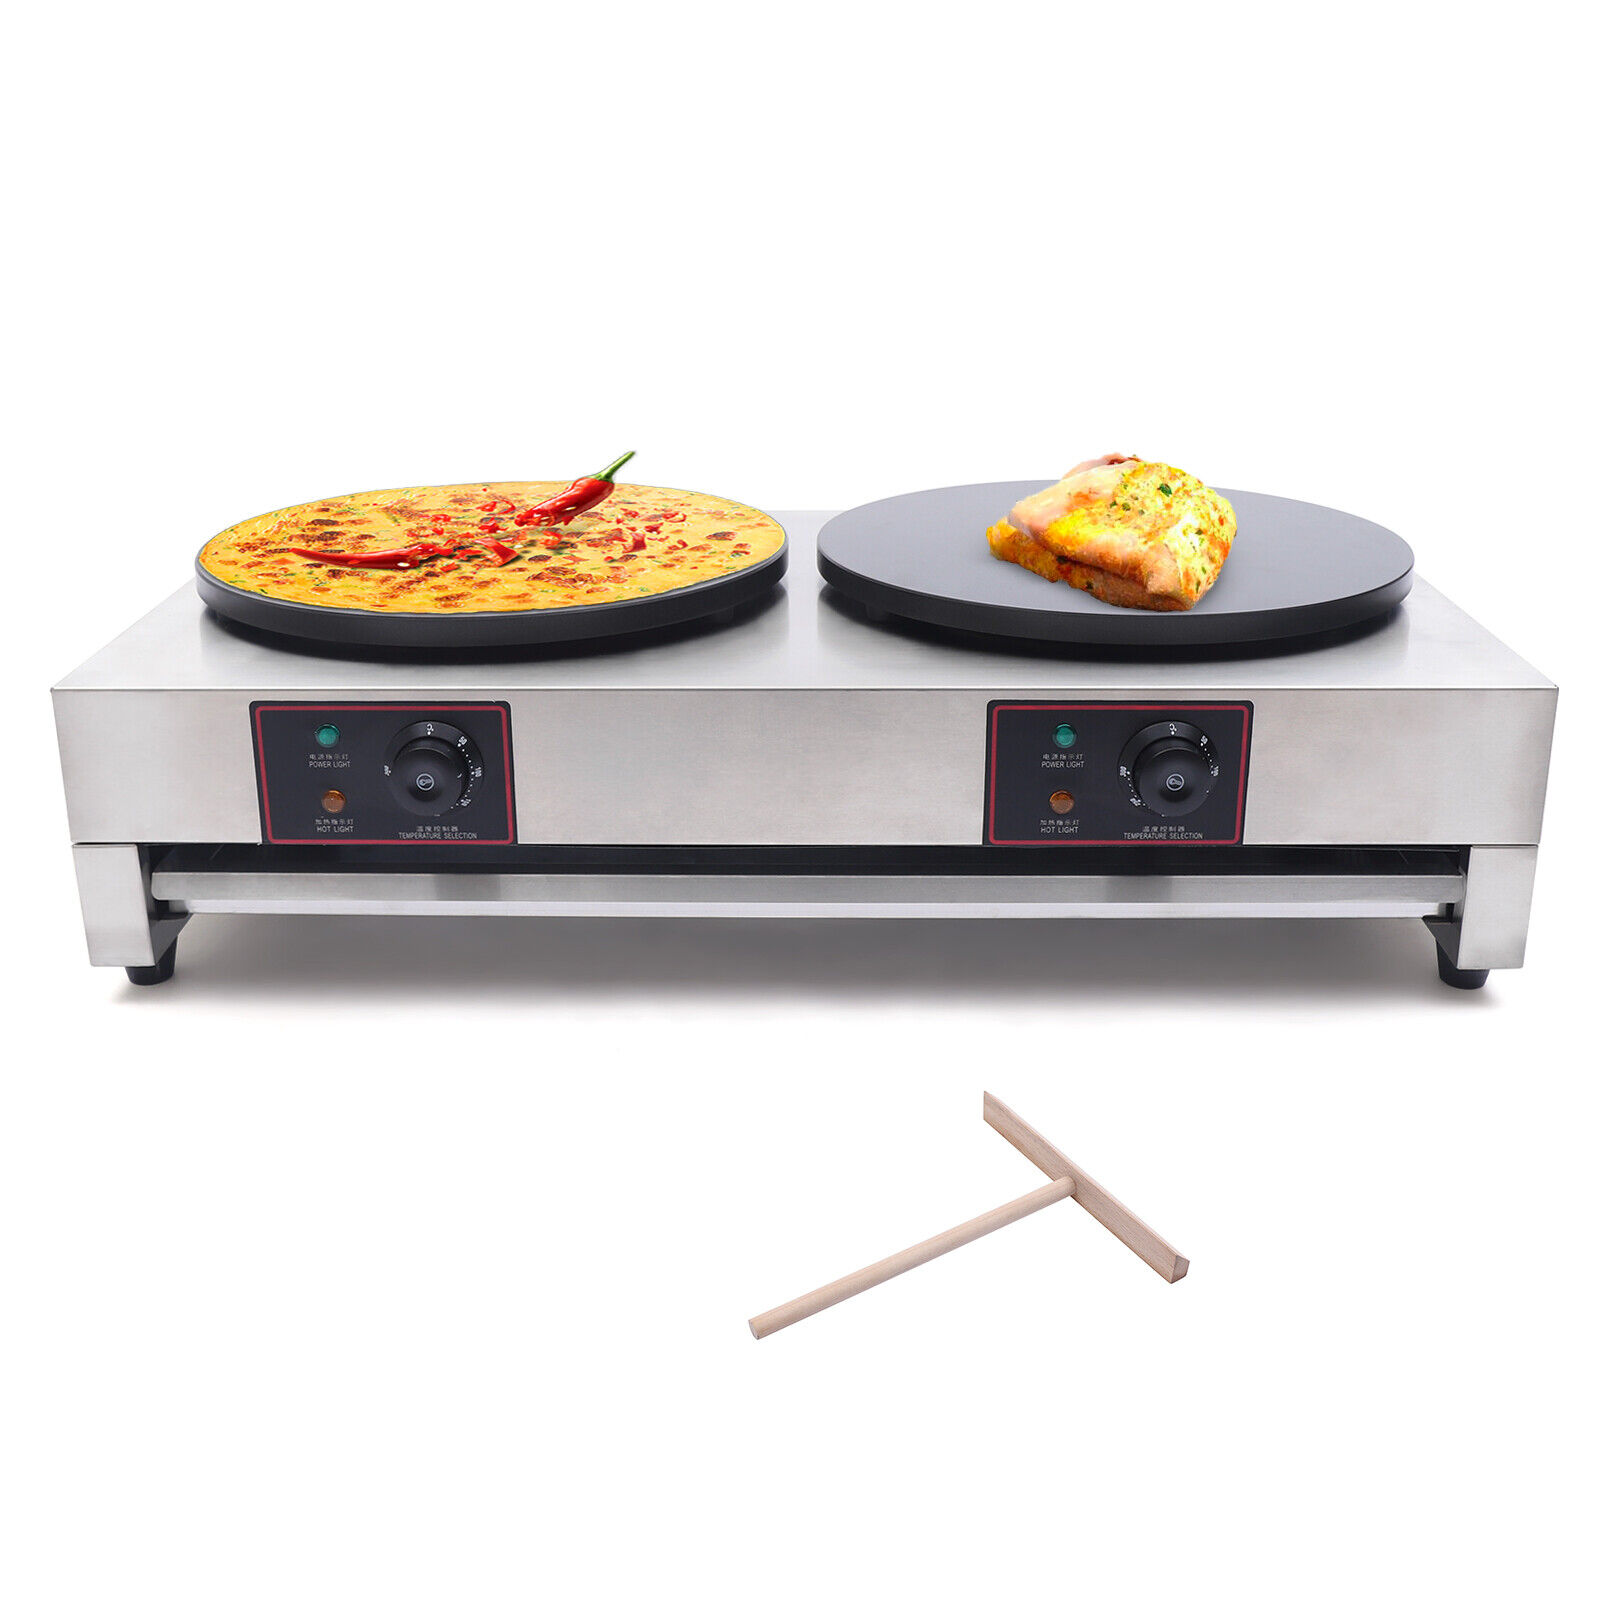 3kw+3kw 40cm 16" Commercial Double Pancake Maker Luxury Electric Crepe Unbranded Does Not Apply - фотография #12